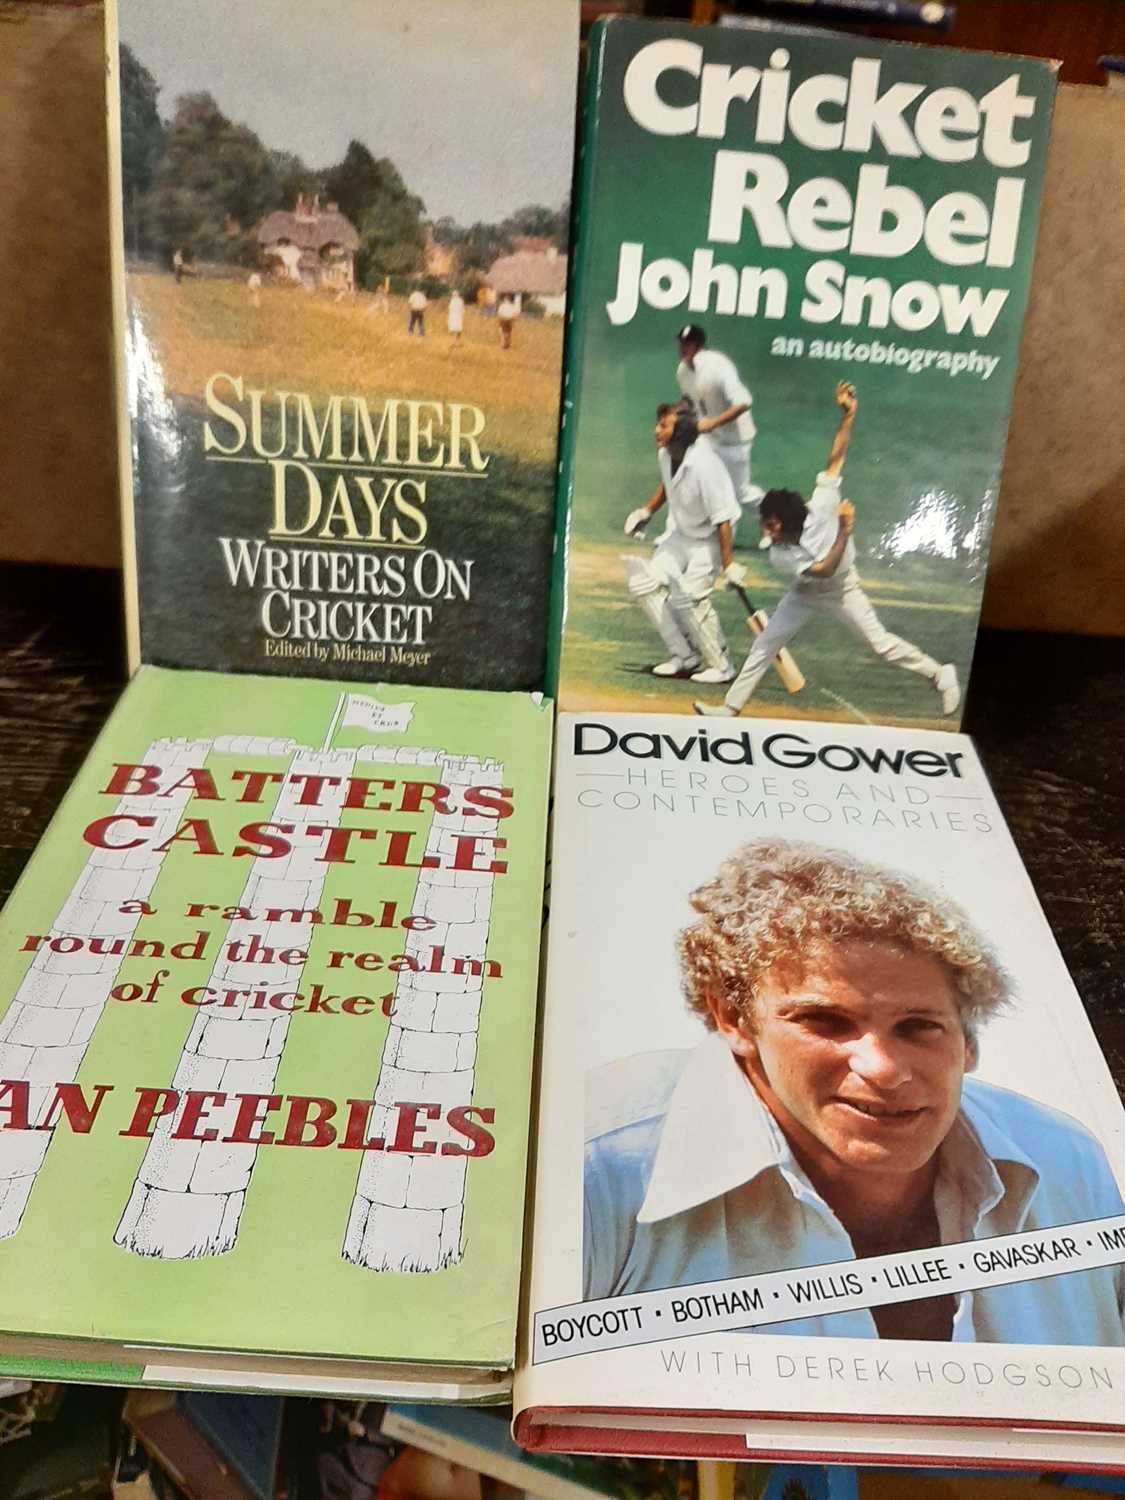 20 cricket interest books to include Parsons Pitch by David Shepherd, Denis Compton's annual etc [